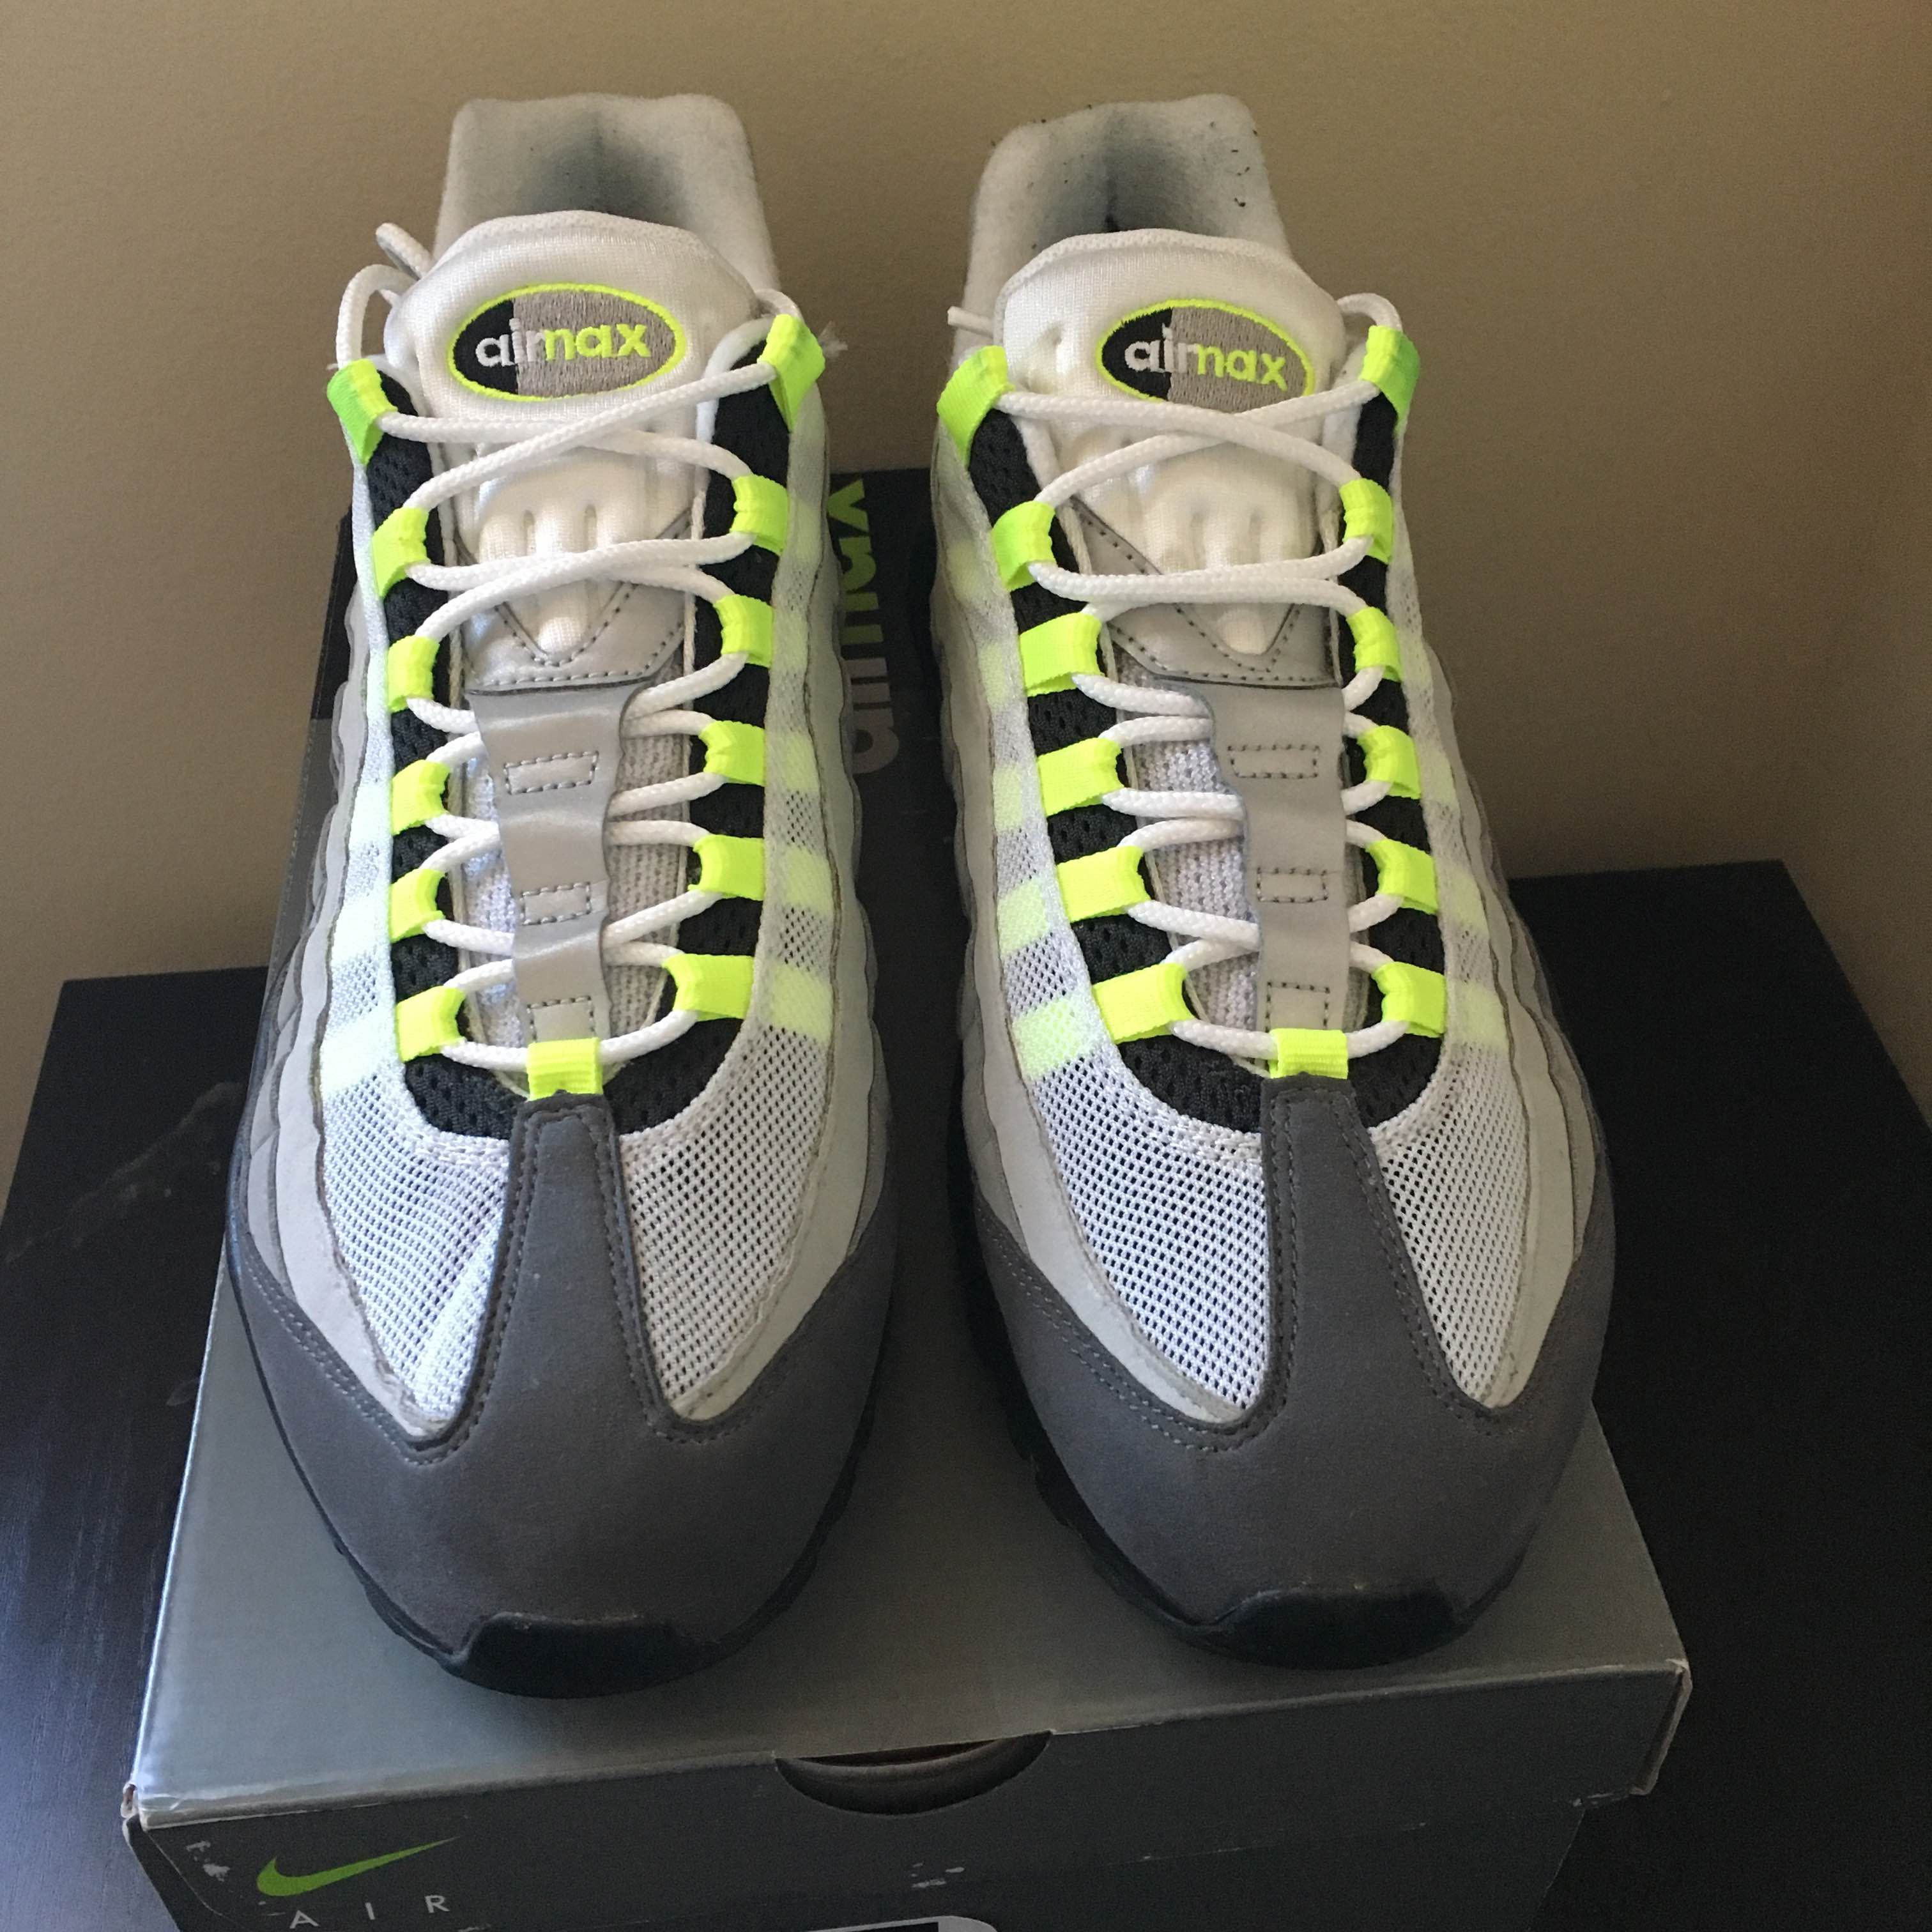 Nike Air Max 95 OG Neon 2015 Size US 10.5 / EU 43-44 - 1 Preview